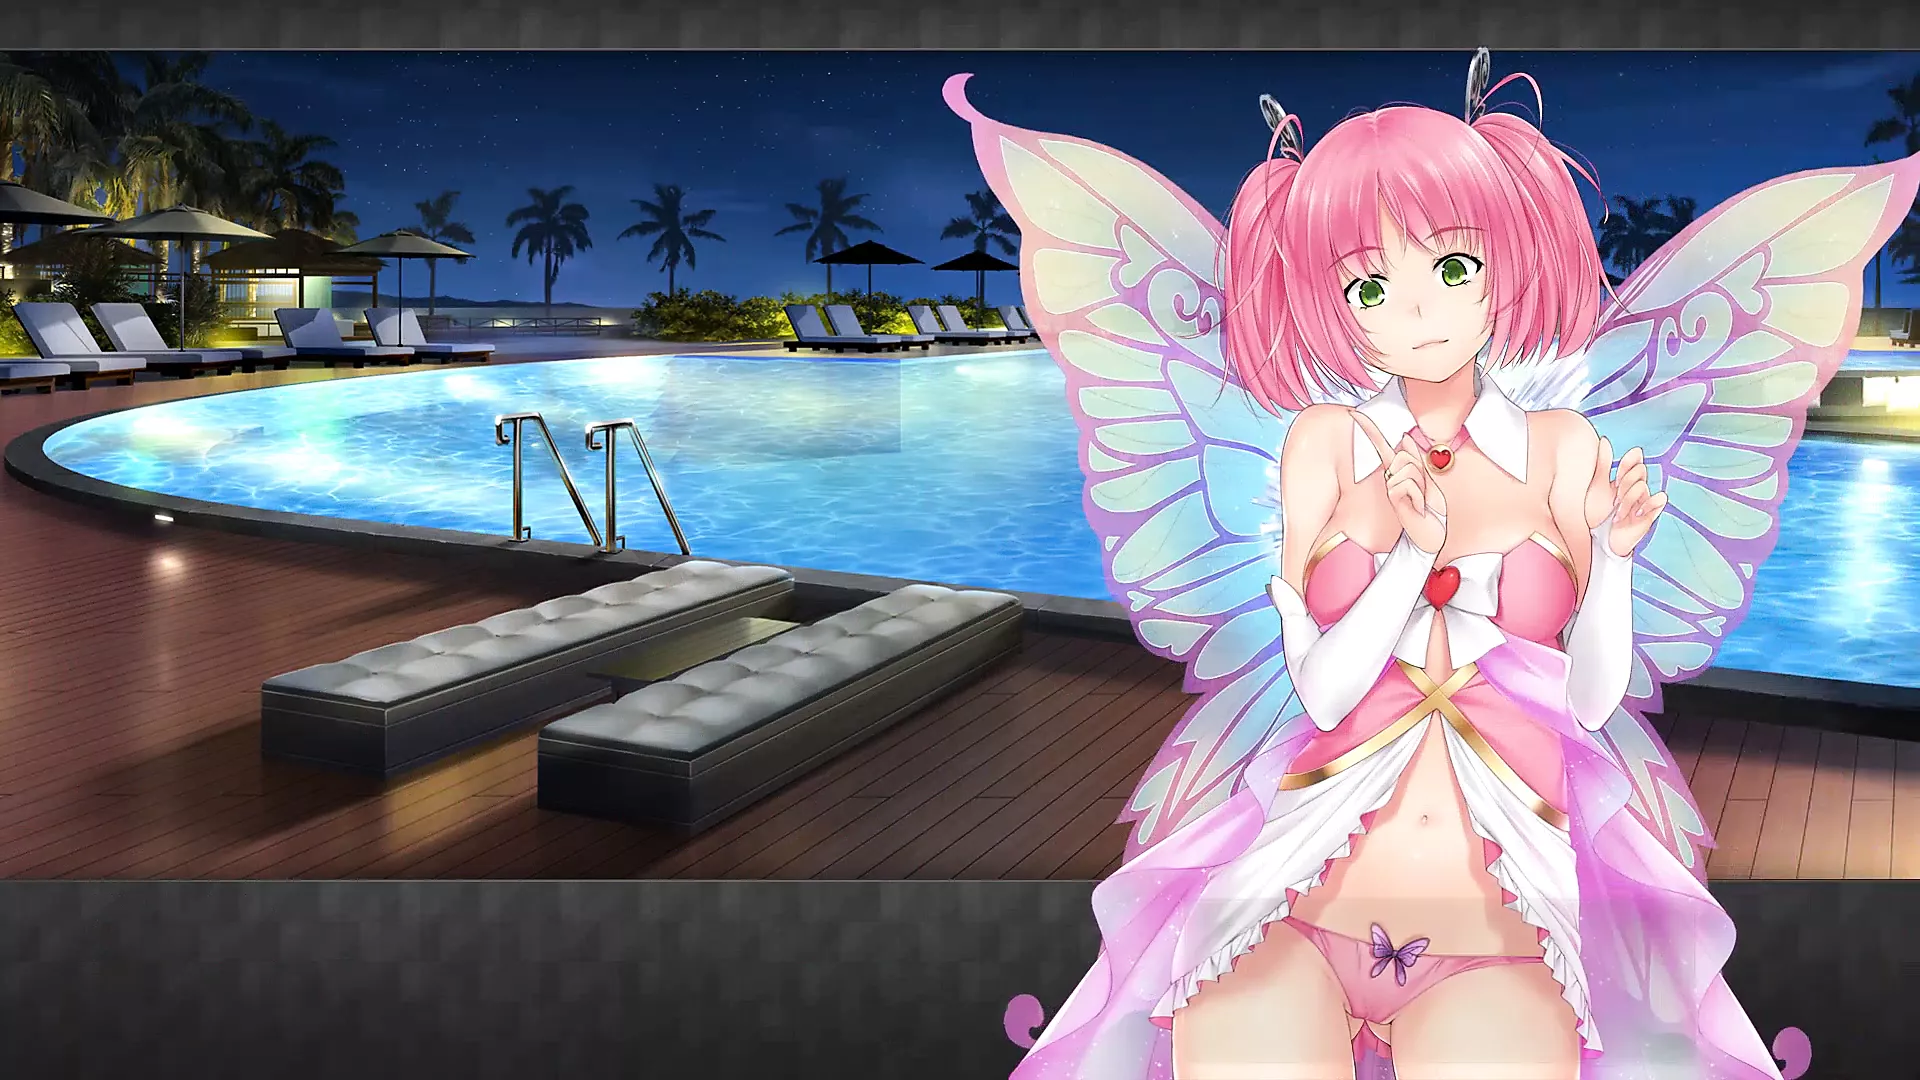 Huniepop 2 Sex with Kyu watch online or download pic